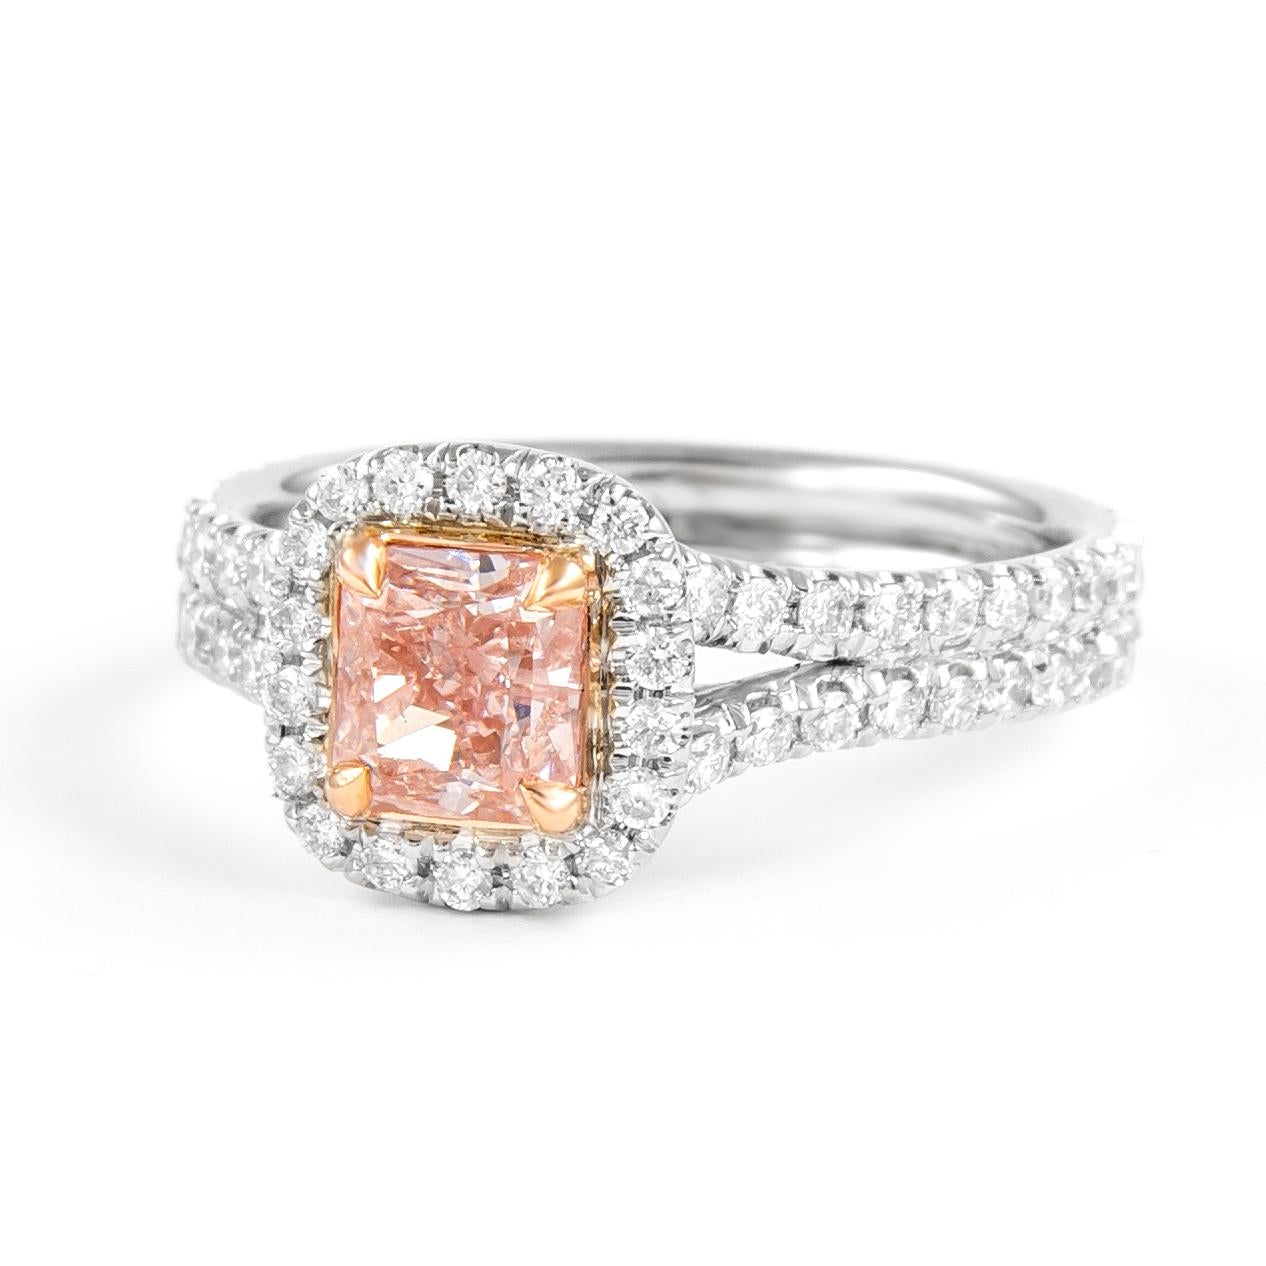 Contemporary Alexander GIA Certified 1.48ctt Fancy Orangey Pink Diamond Ring 18k Gold For Sale